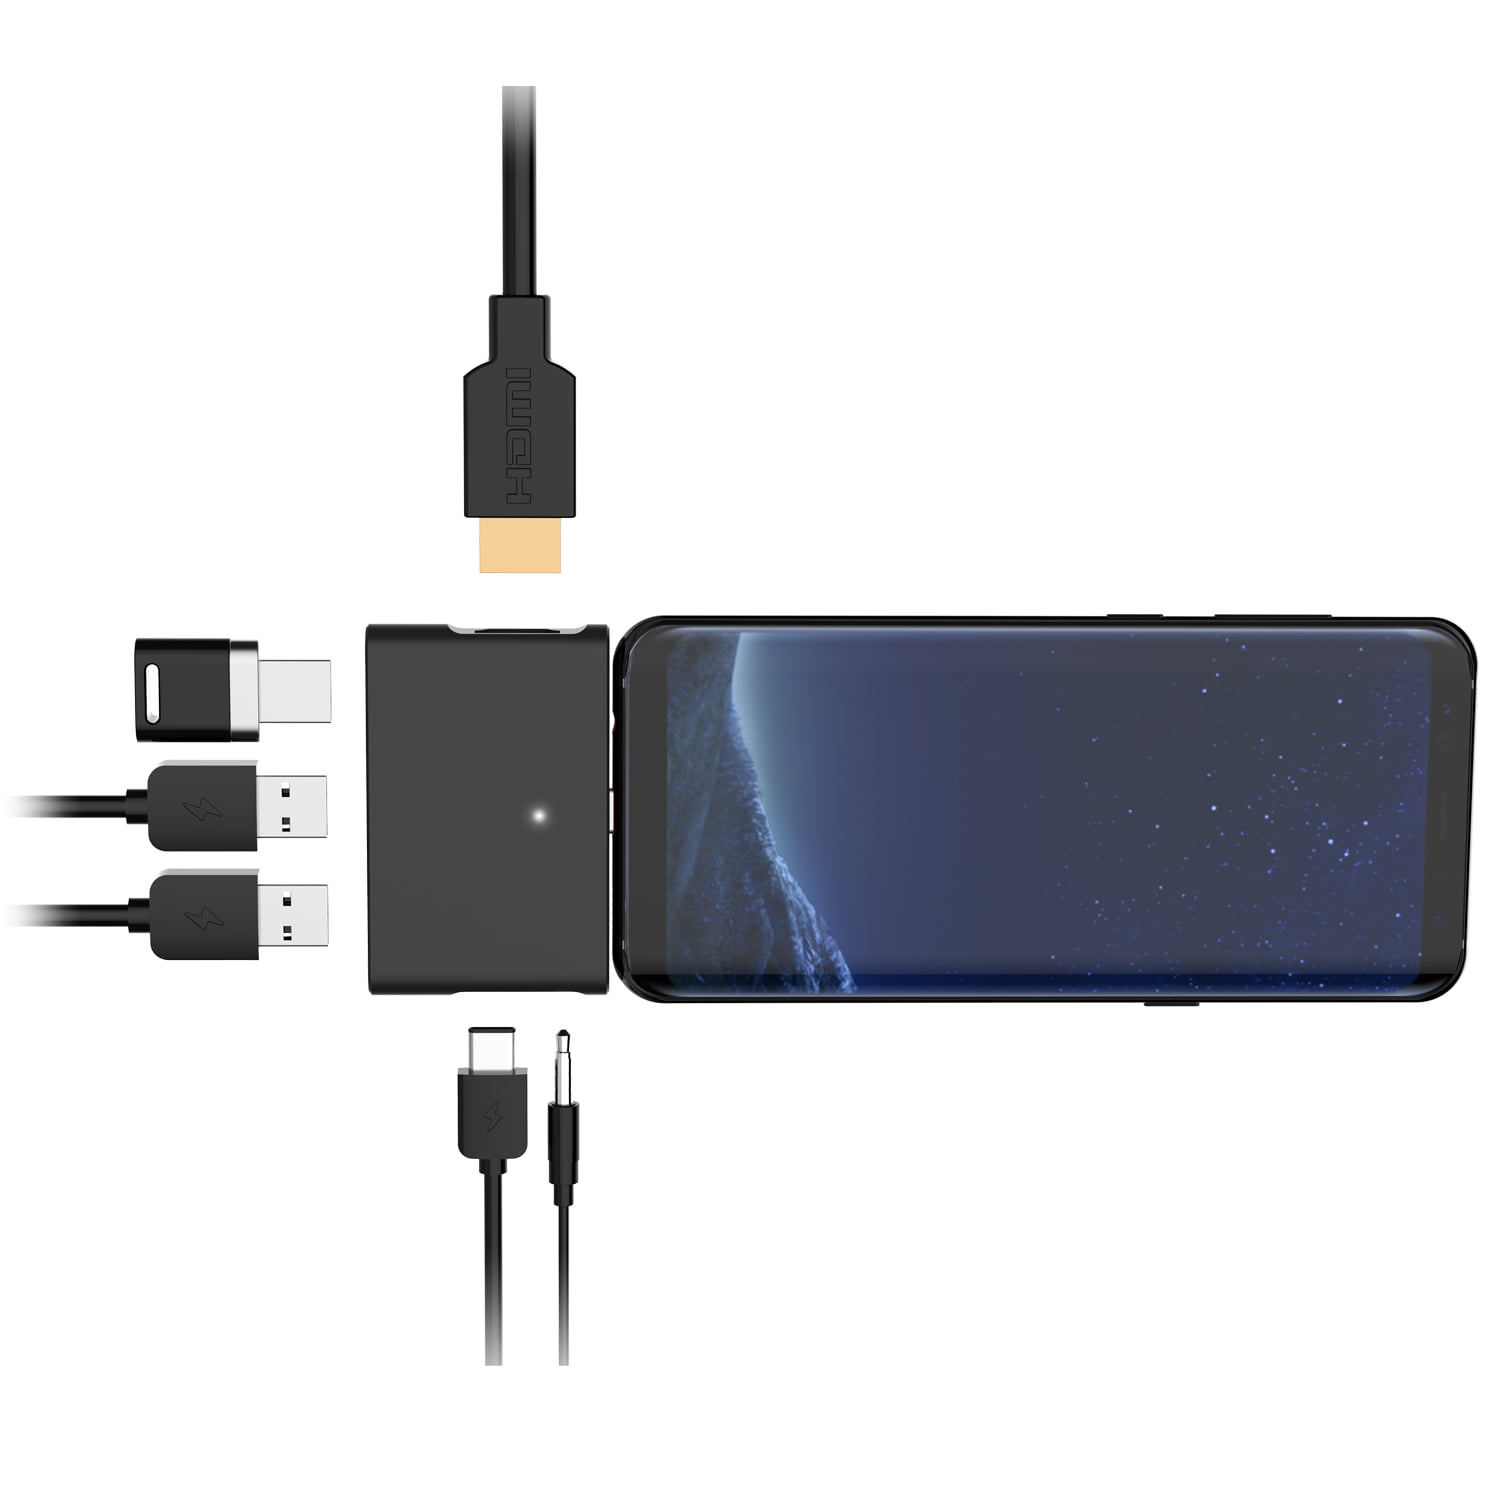 Usb-C / Type C Hub Adapter For Samsung Dex Station And Nintendo Switch  Docking - 4K Hdmi, Usb C (Power Delivery), 3 X Usb A 3.0 And 3.5Mm Audio  Jack - Walmart.Com